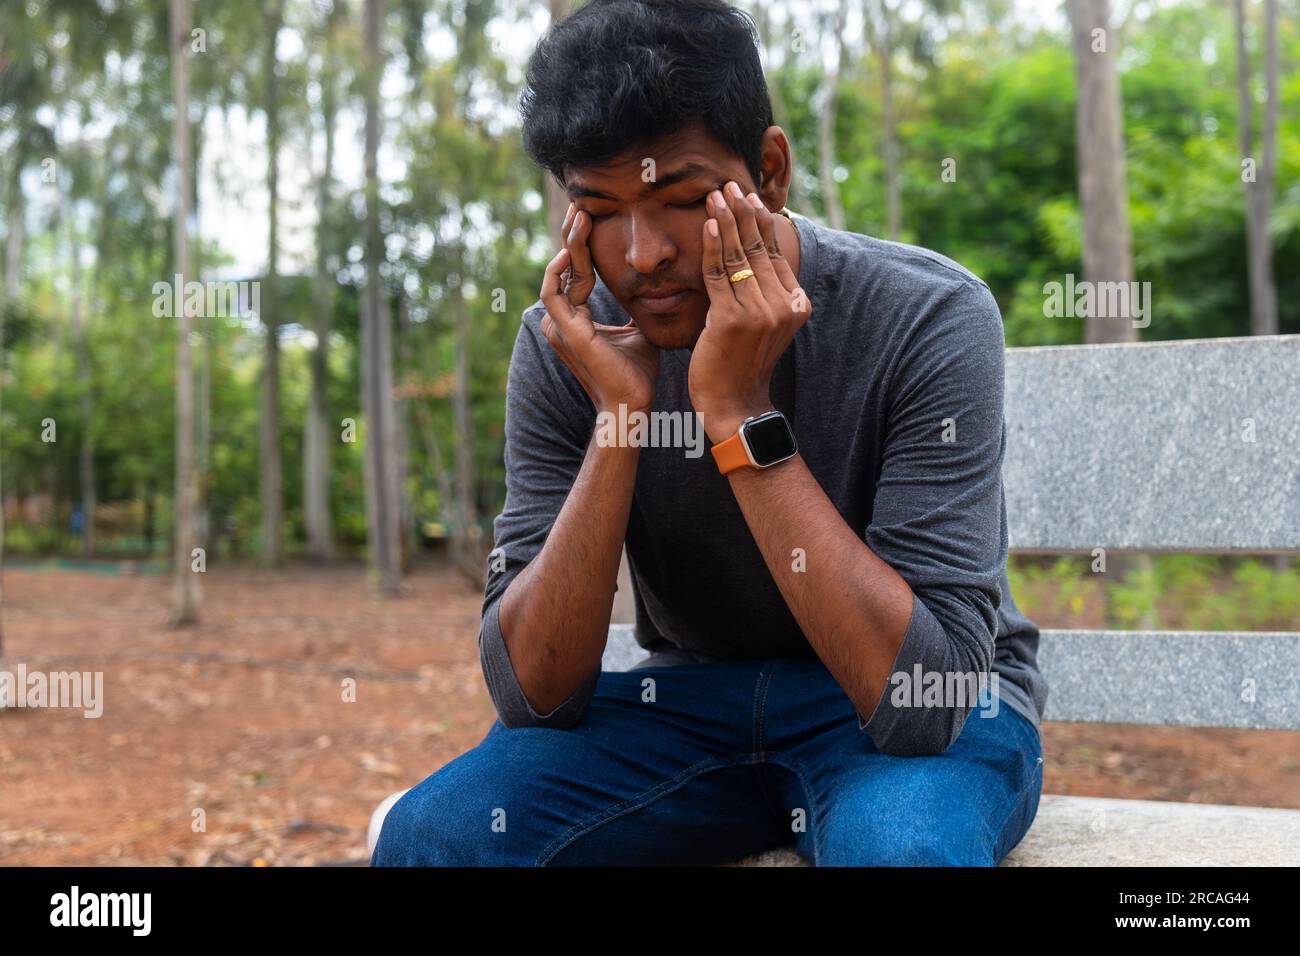 A depressed Indian man sits on a bench in a park, tears streaming down his face. He looks lost and alone, his head in his hands. Stock Photo